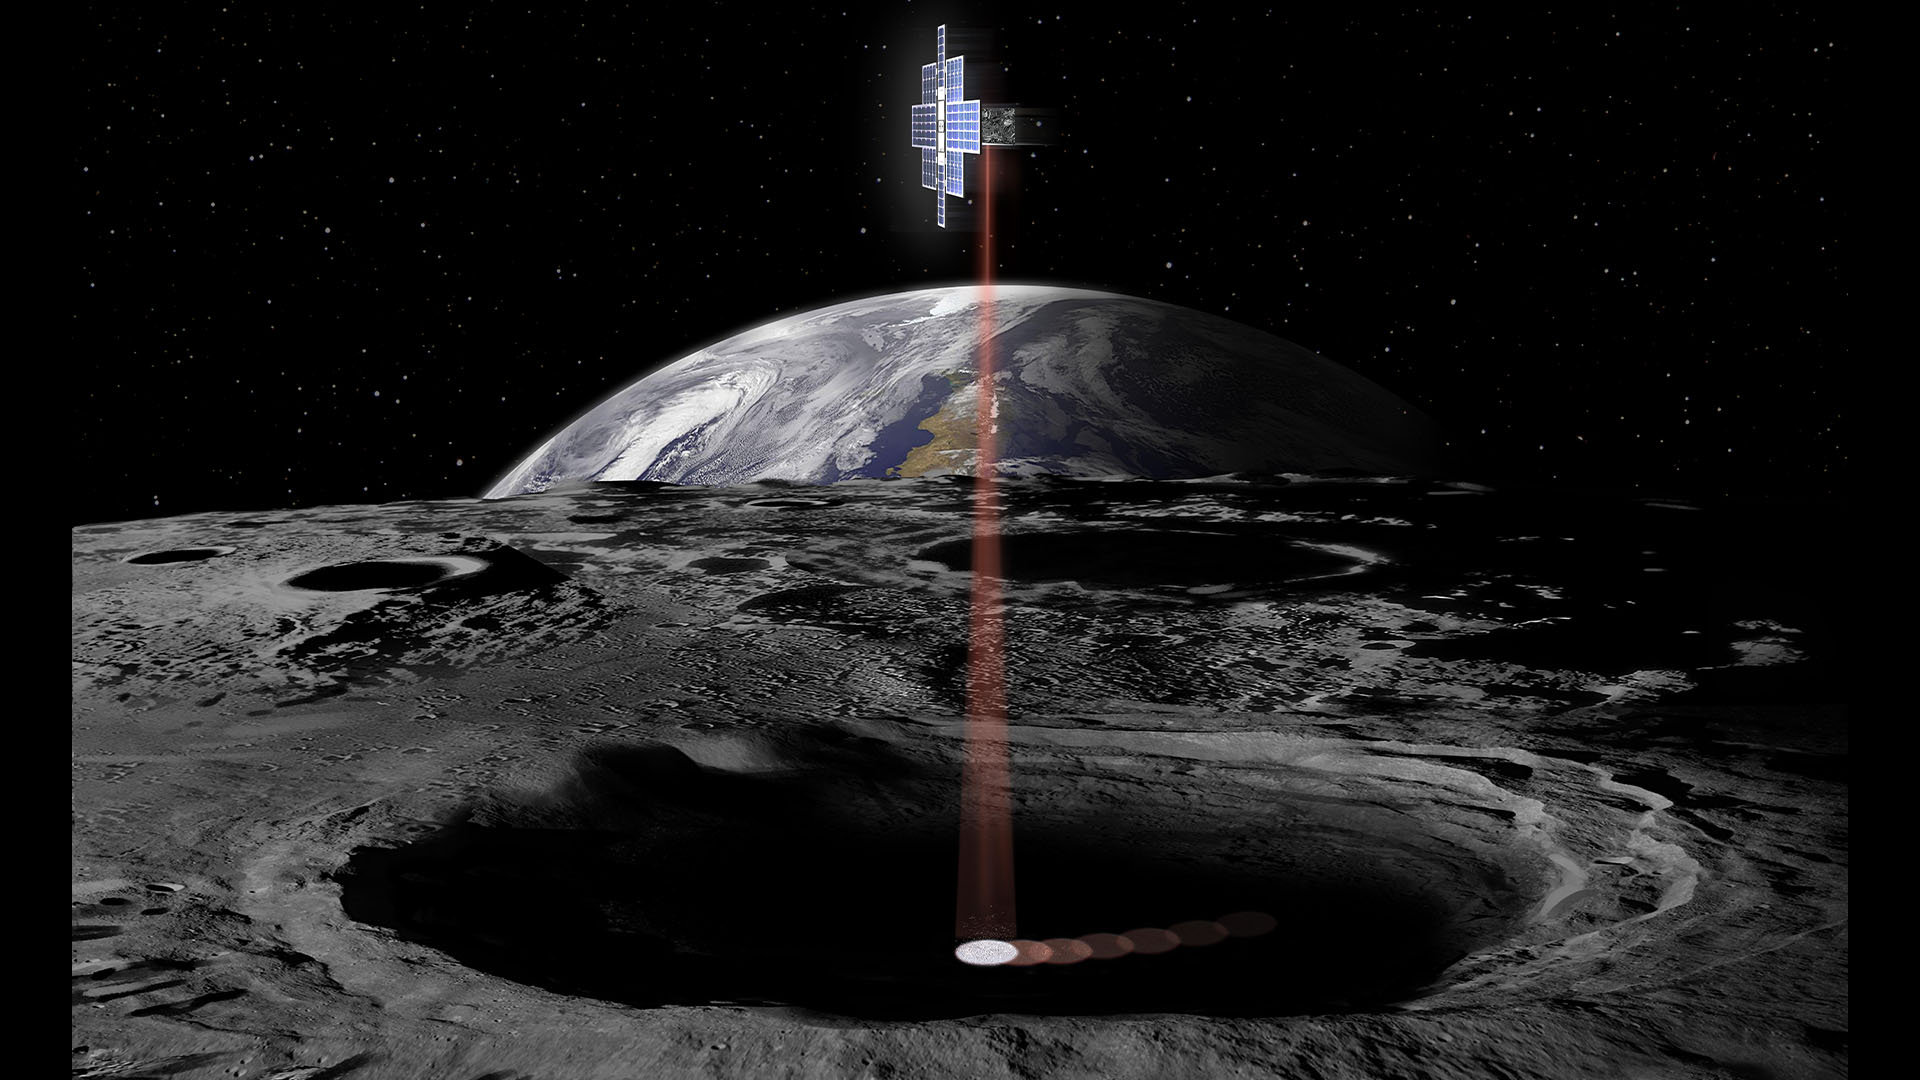 This artist's concept shows the Lunar Flashlight spacecraft, a six-unit CubeSat designed to search for ice on the Moon's surface using special lasers.